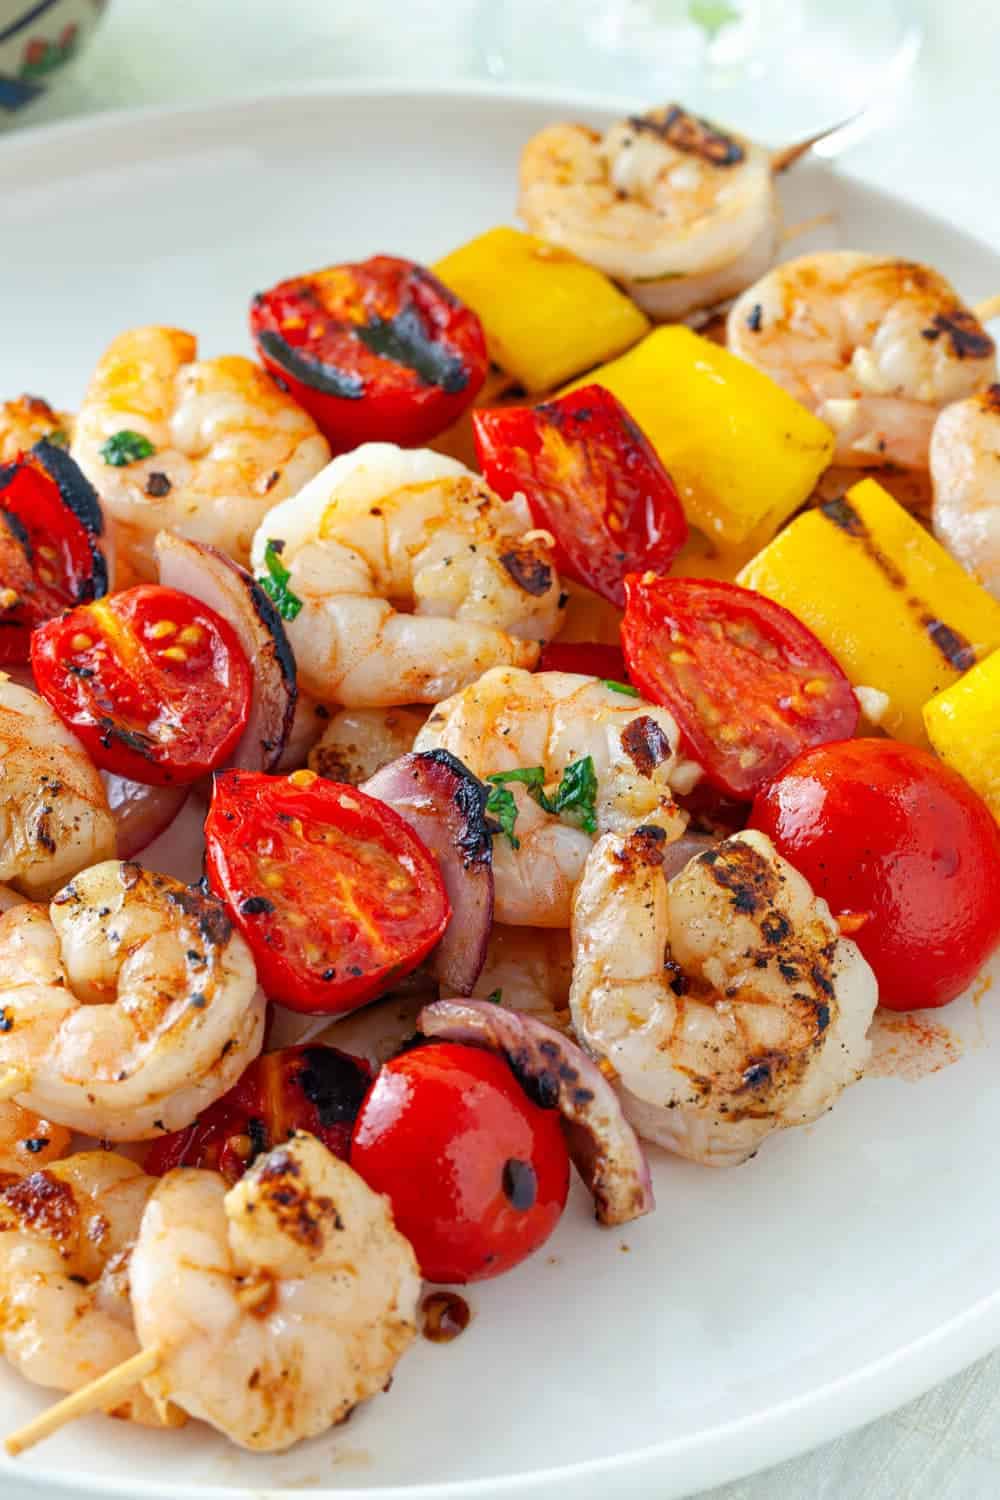 Grilled shrimp, tomatoes, and vegetables on skewers on a plate on a table.